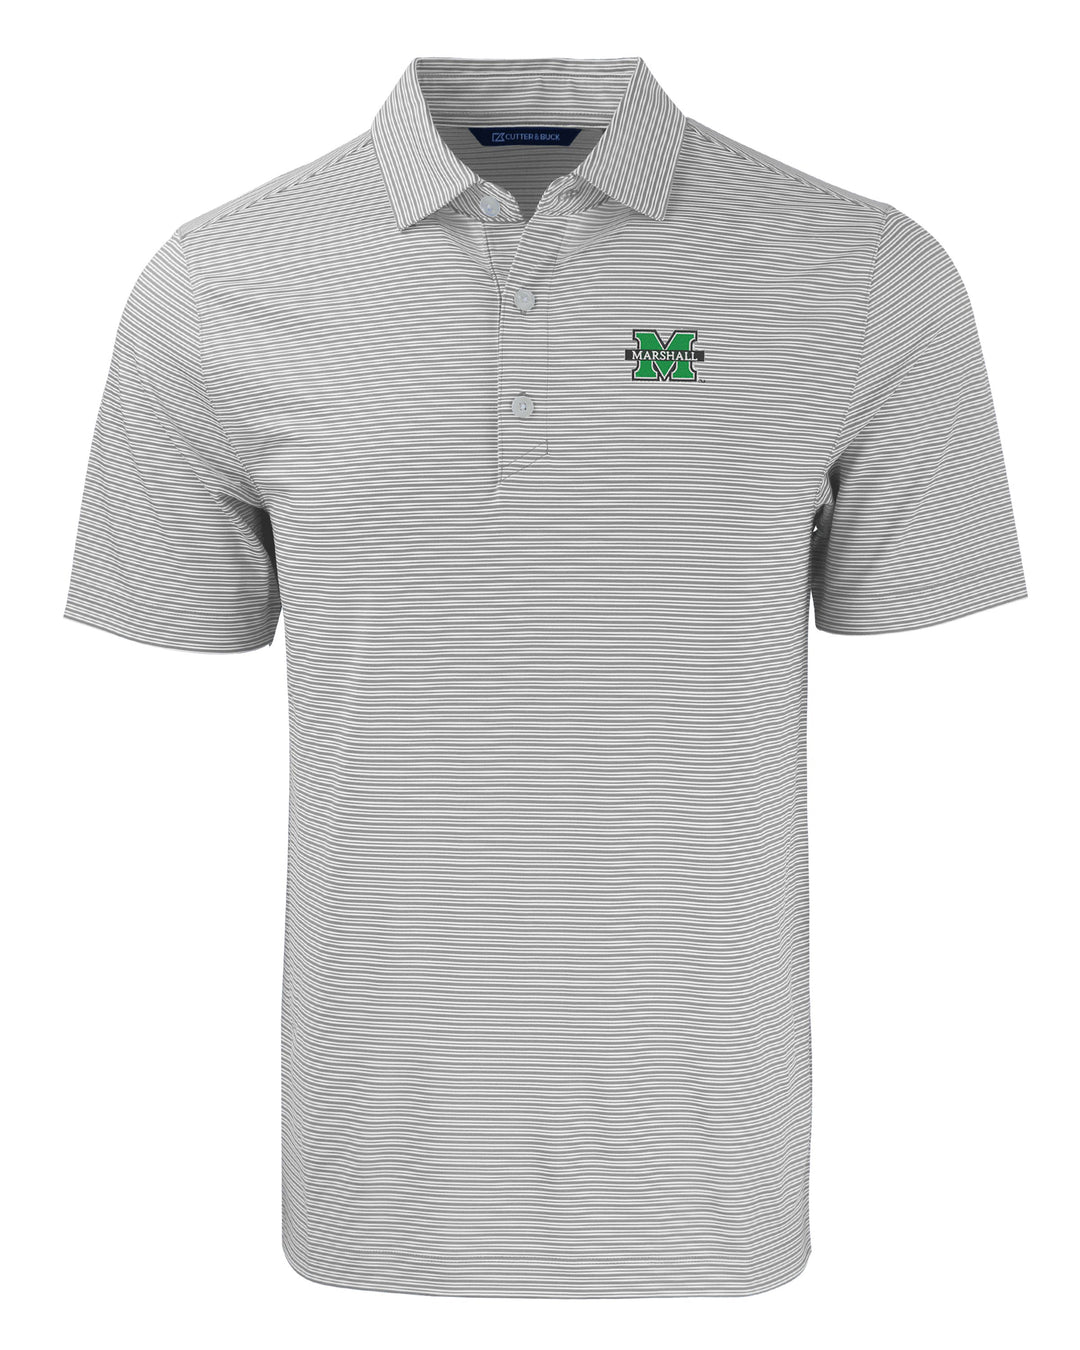 Front view of Forge Stripe polo, featuring a Marshall block M logo on the left chest.